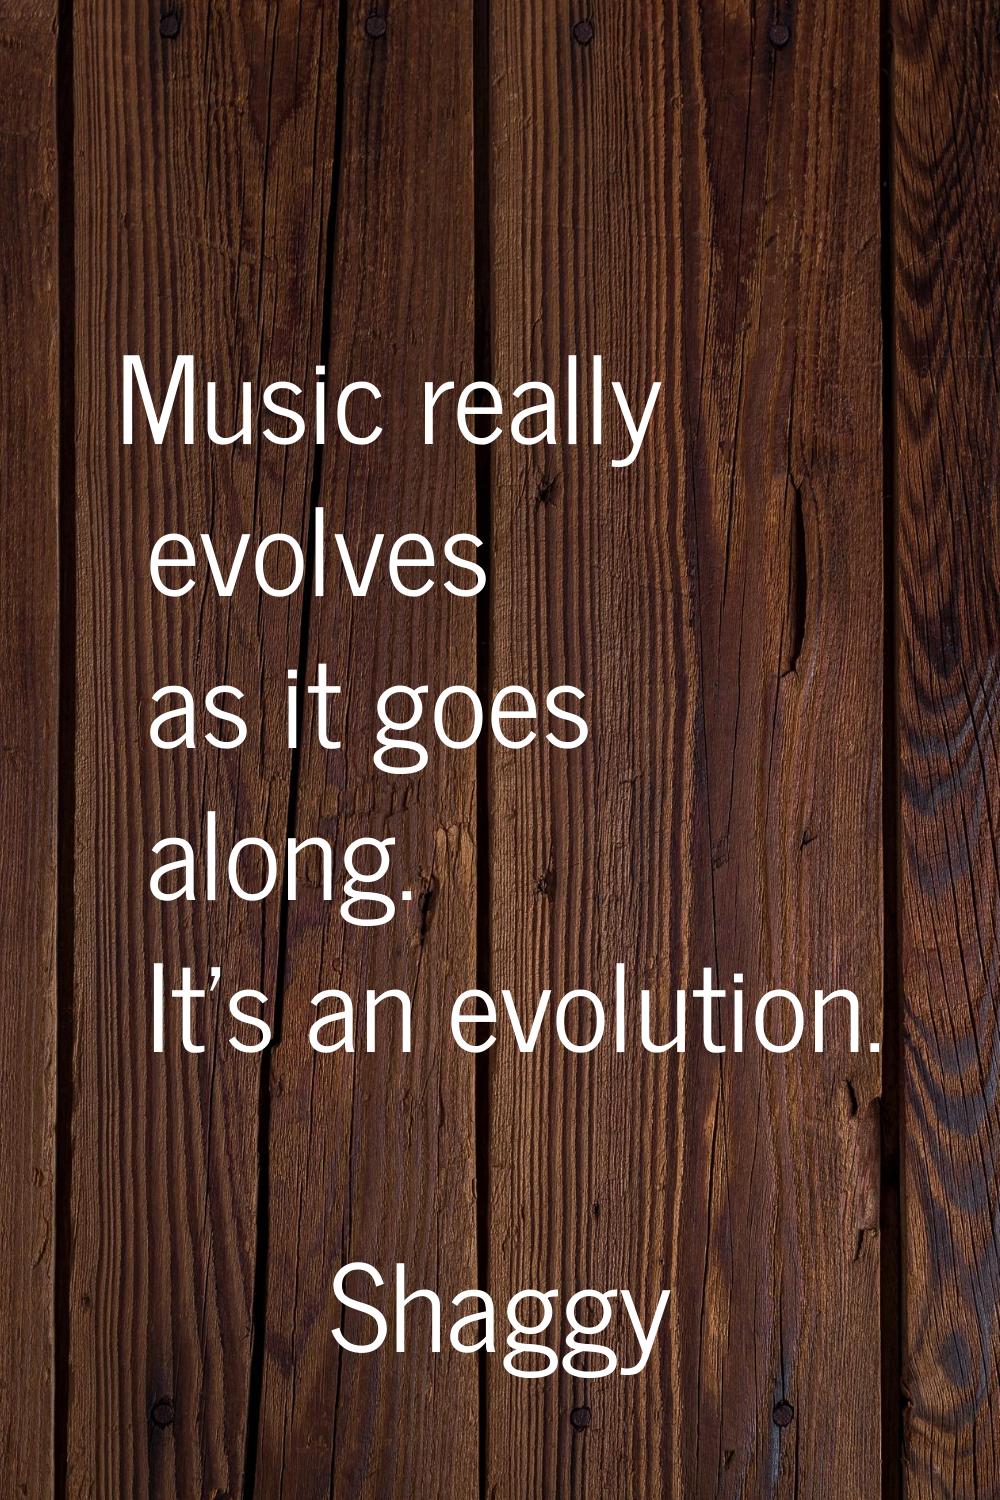 Music really evolves as it goes along. It's an evolution.